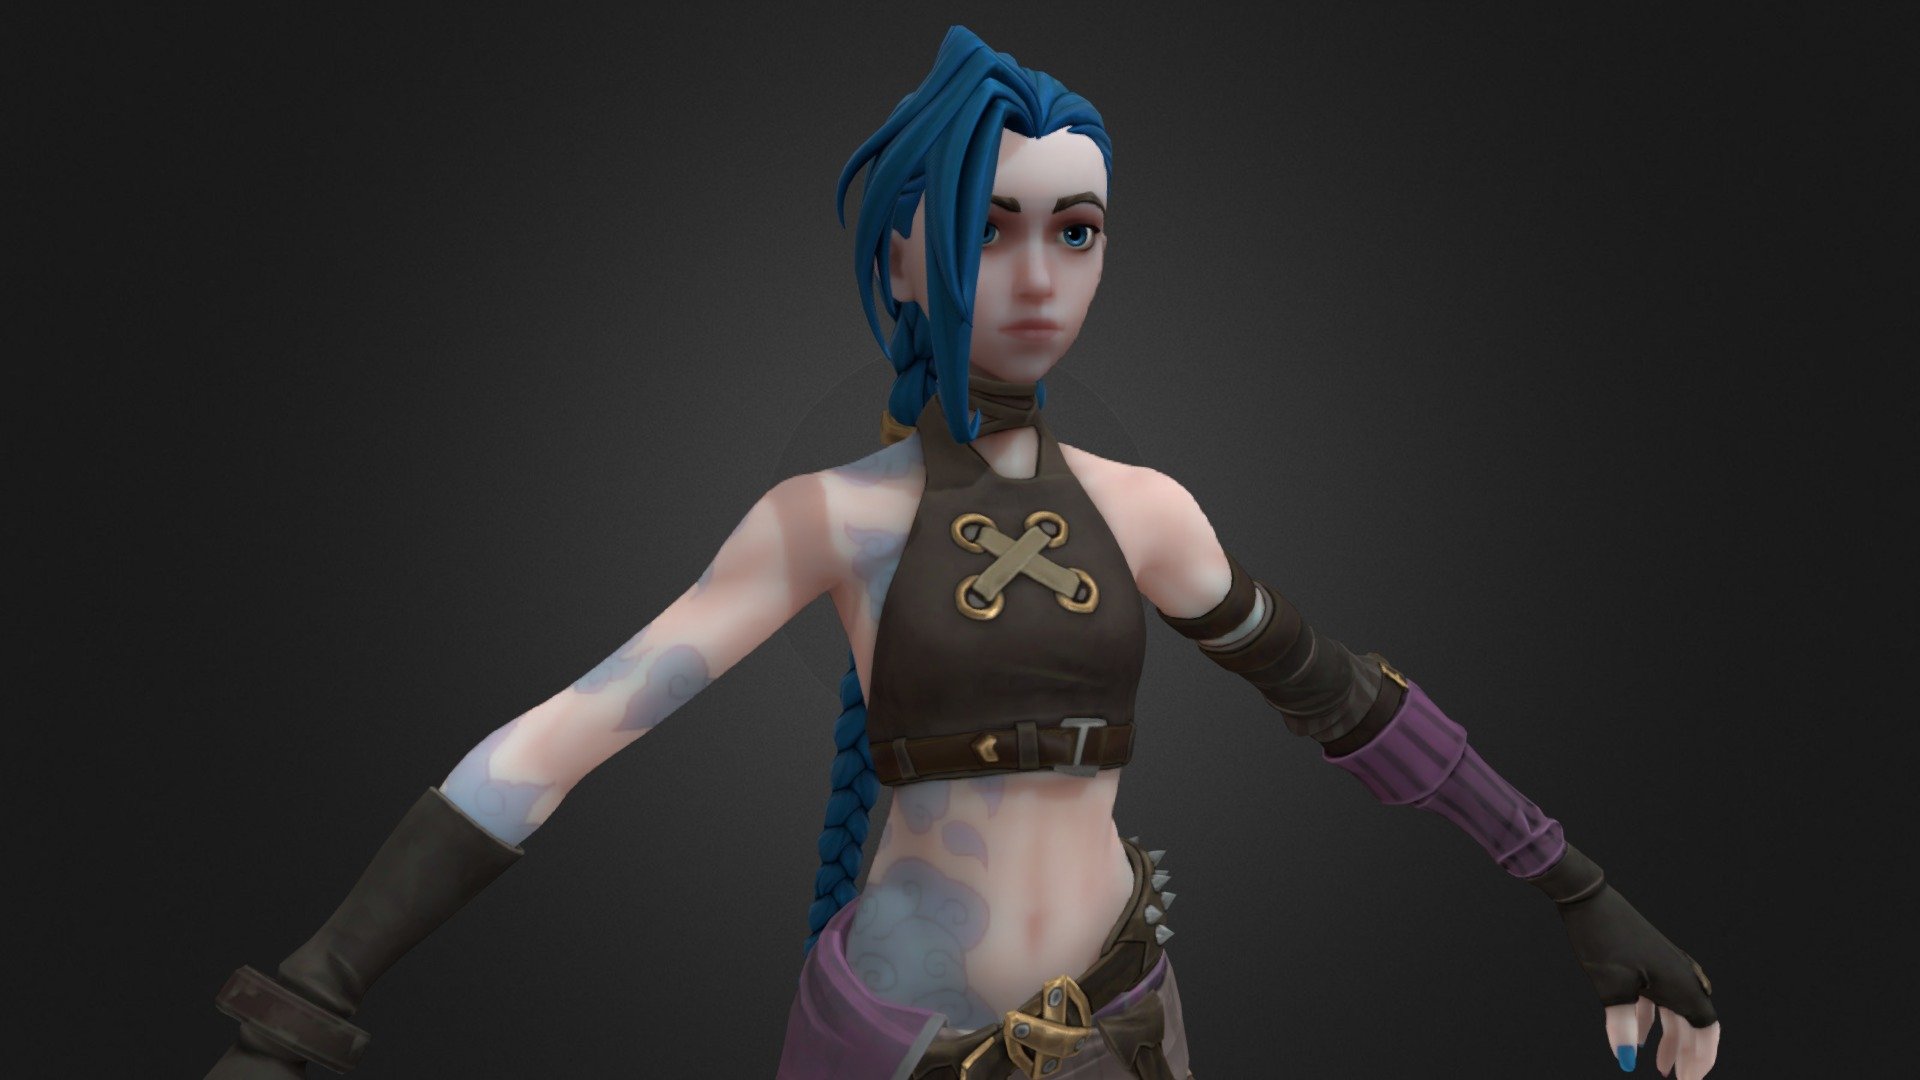 Jinx from Arcane in Fortnite Style

Arcane Jinx original character from League of Legends by Riot Games.
Models and textures made by Epic Games, inc; and its developers.

Needs: Blender 2.80+

Doesn't have IK or animations 3d model